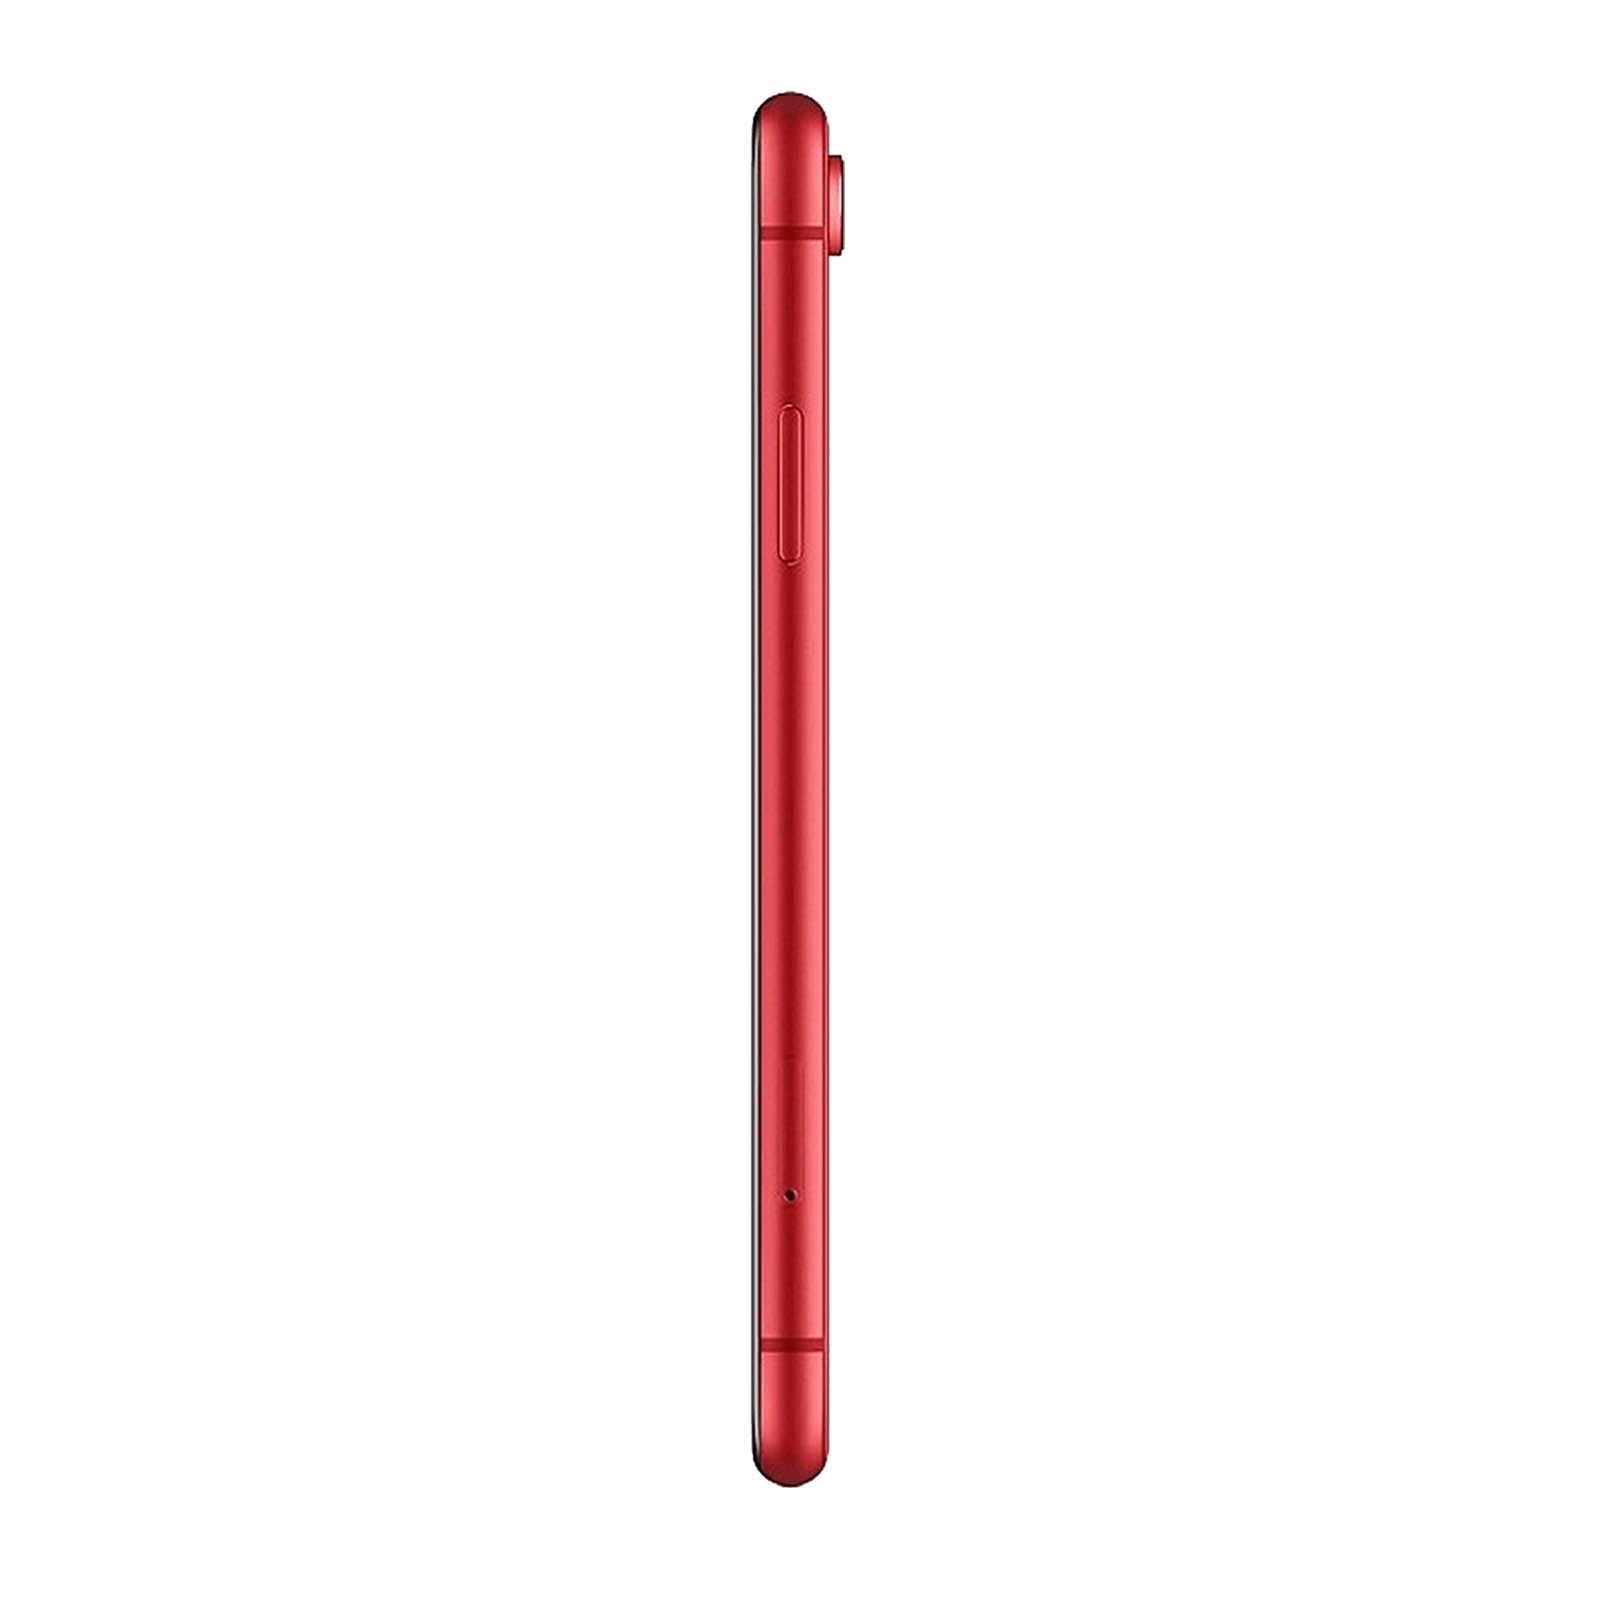 Apple iPhone XR 128GB Product Red Good - T-Mobile